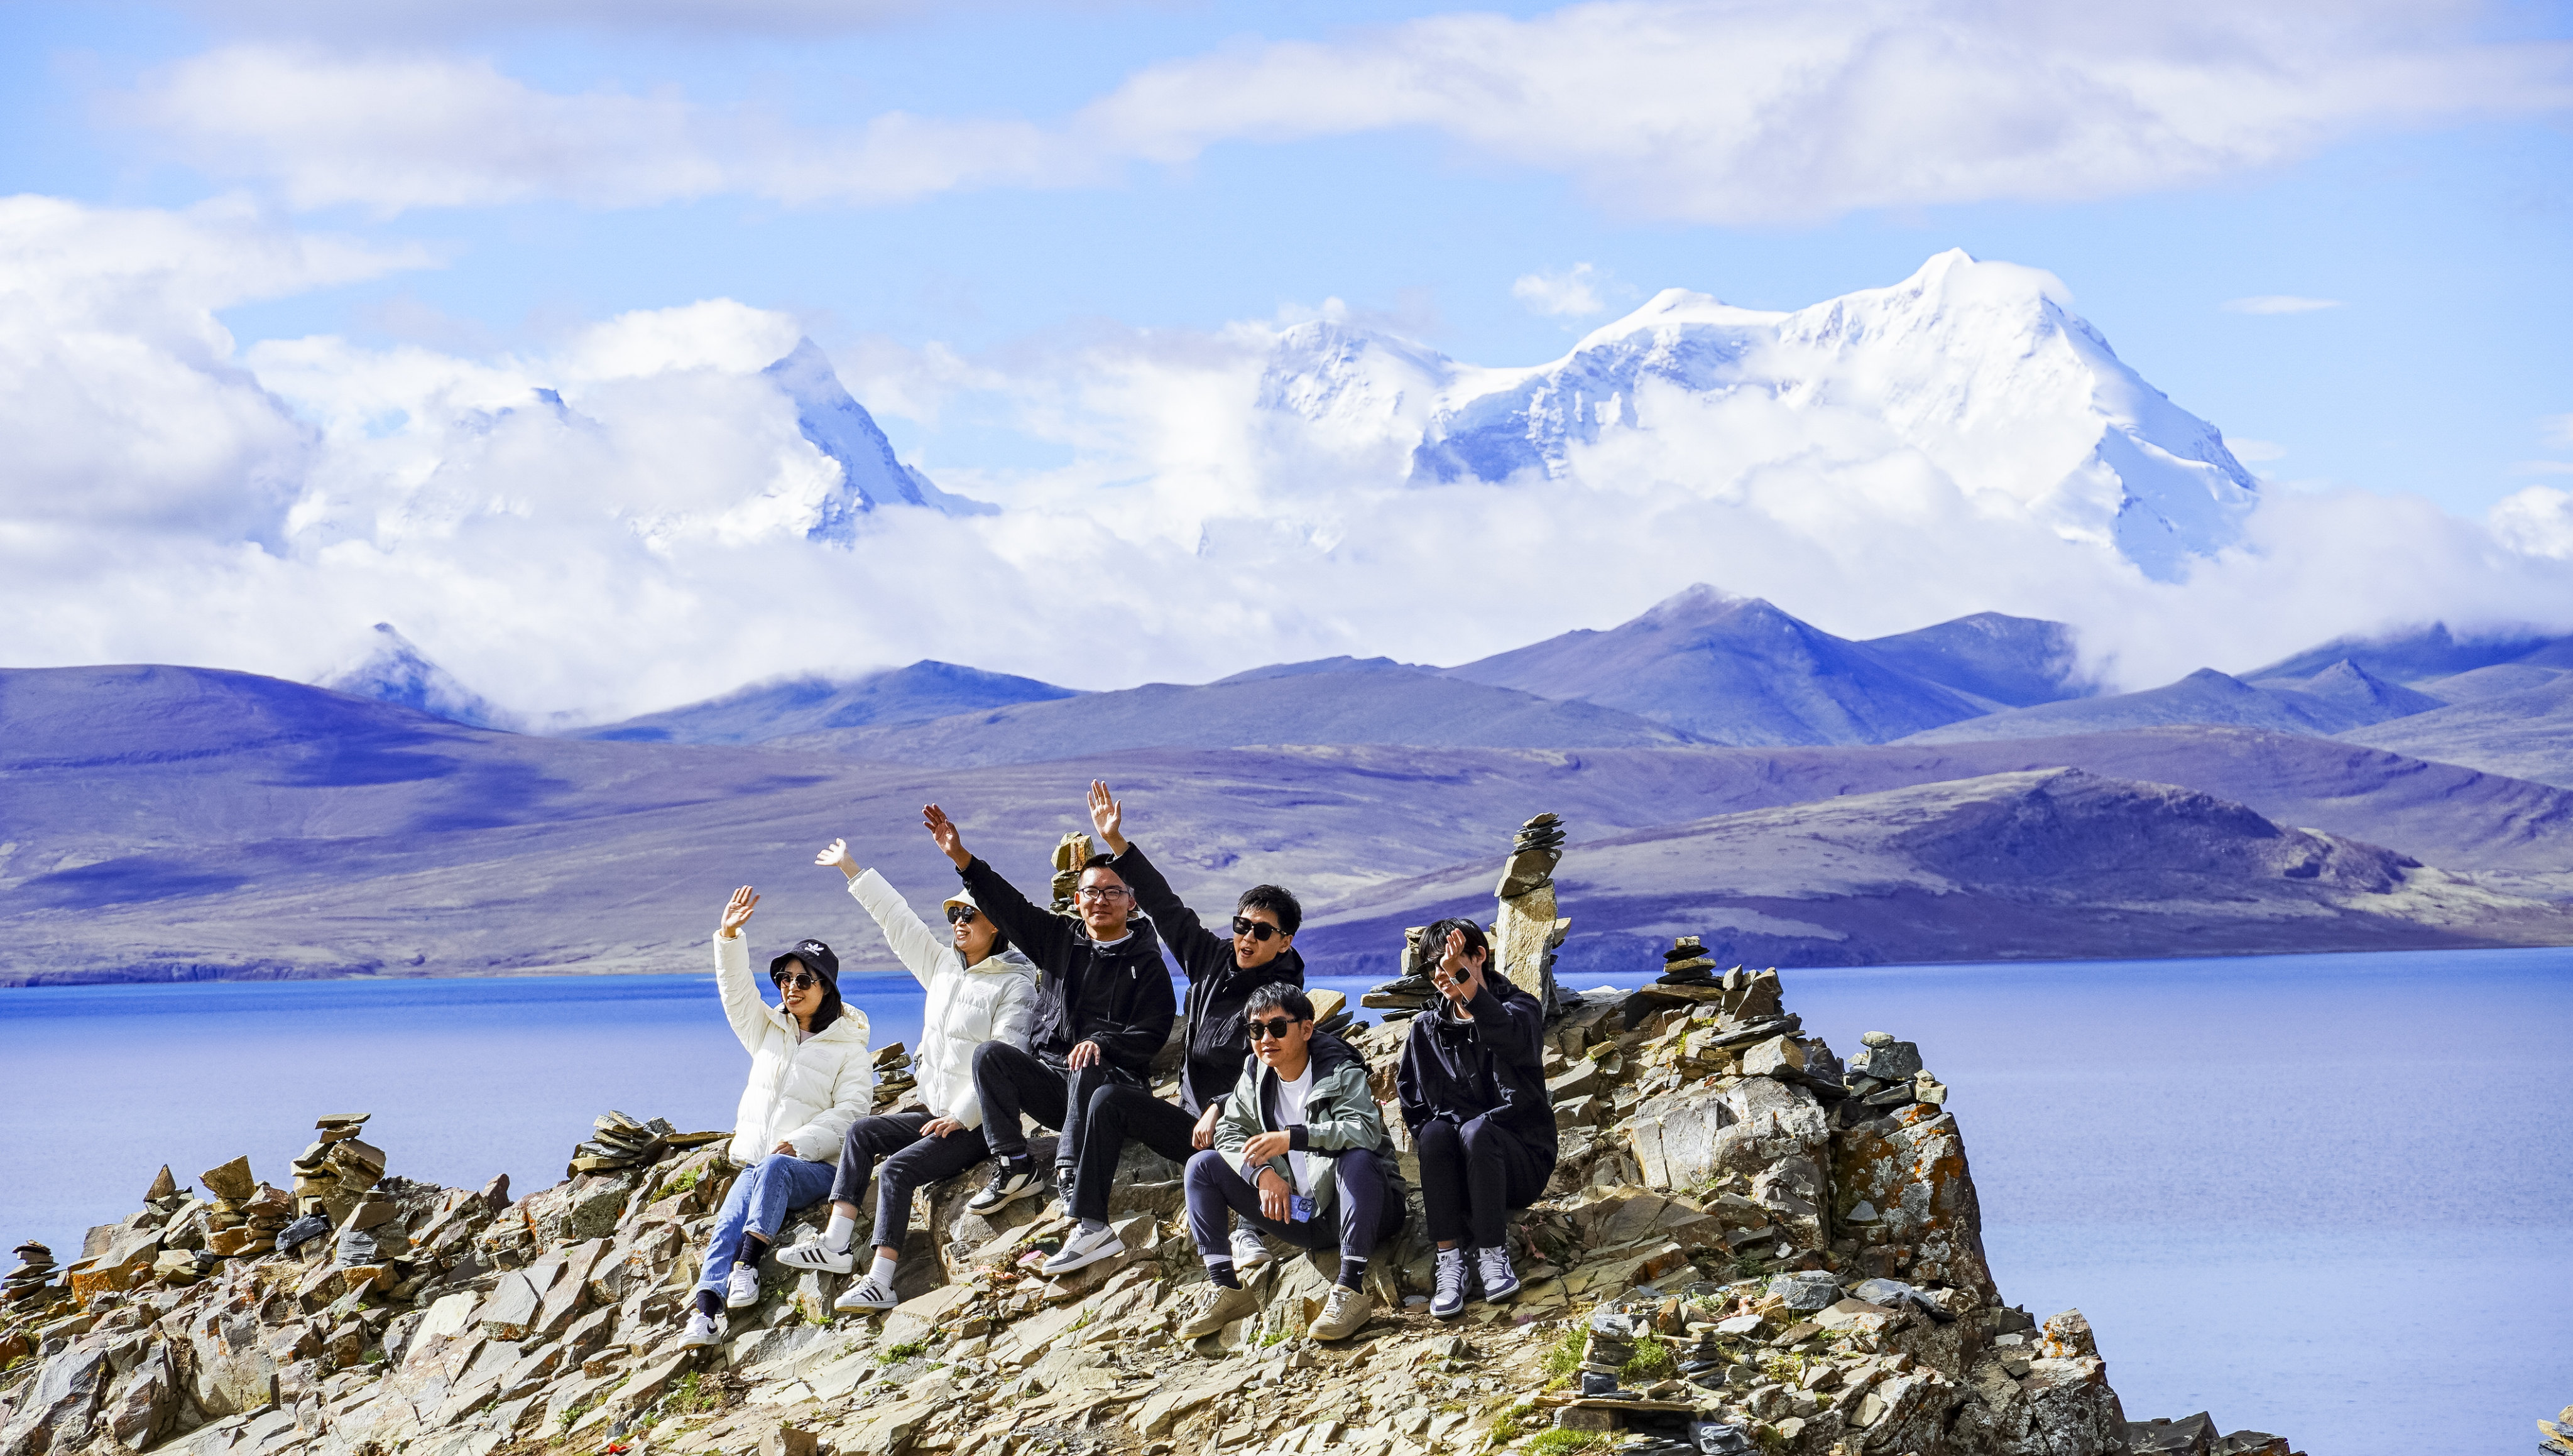 Chinese tourists pose for photos by Lake Puma Yumco in Tibet this month. Only 1.6 per cent of Chinese travelling in tour groups went overseas in the first quarter of this year, down from 30 per cent from the same period in 2019, according to official figures. Photo: Xinhua